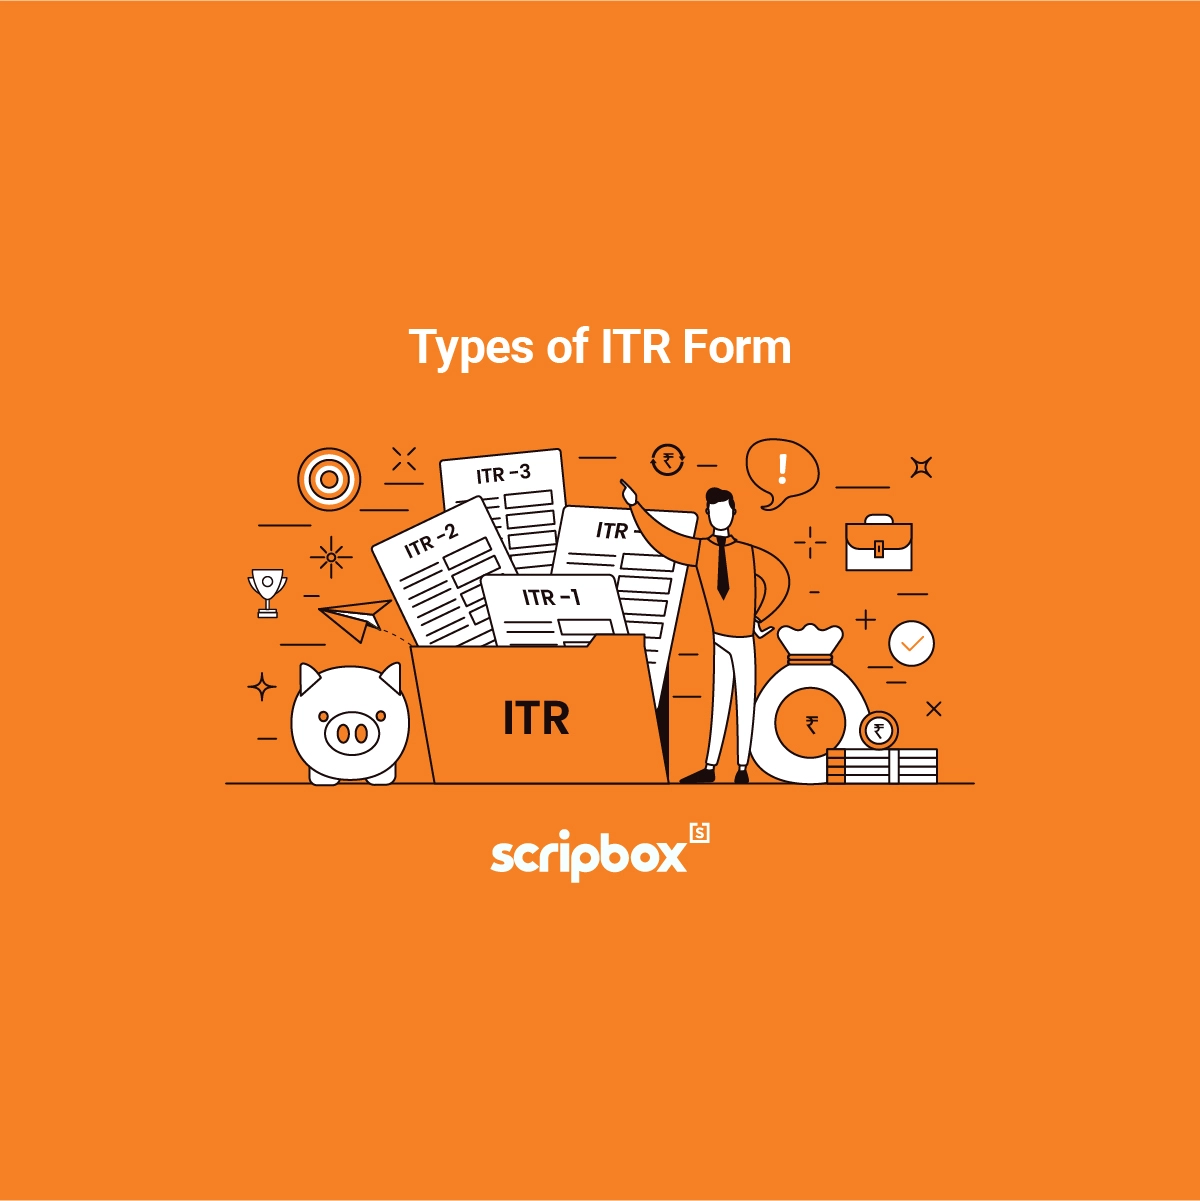 Type of ITR forms